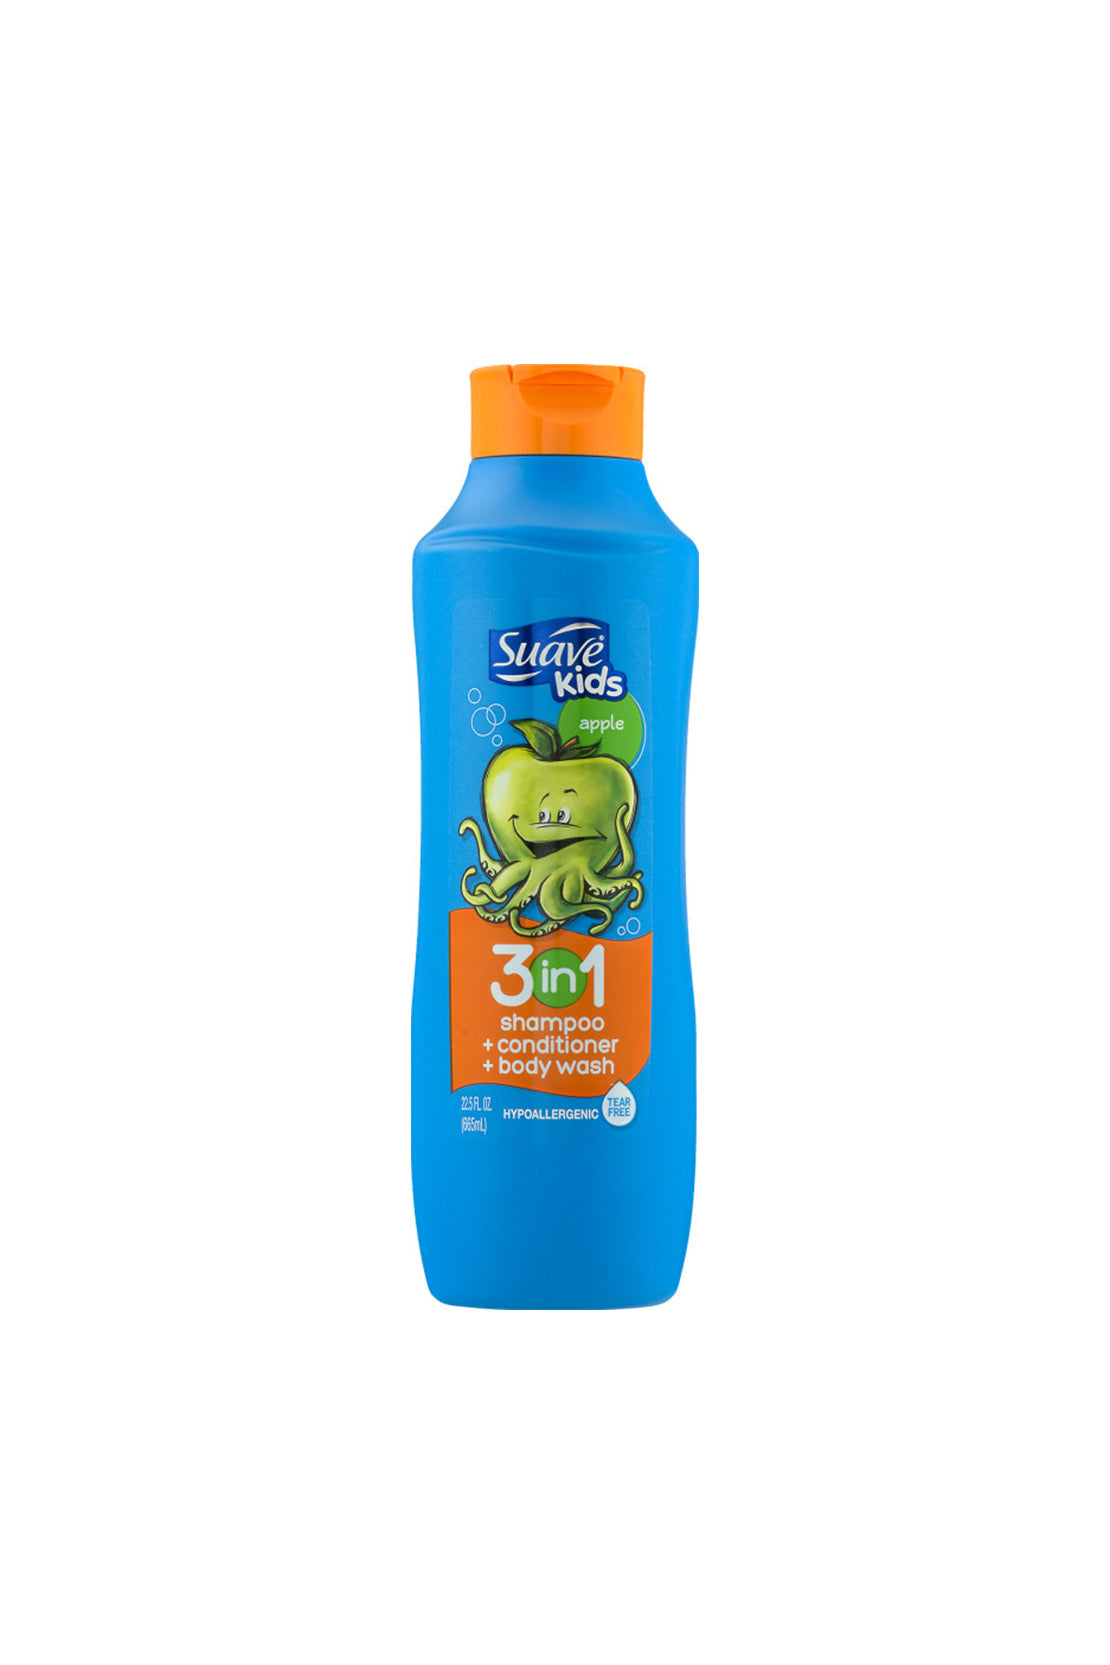 3in1 Kids Apple Shampoo,Conditioner And Body Wash 665ml RIOS